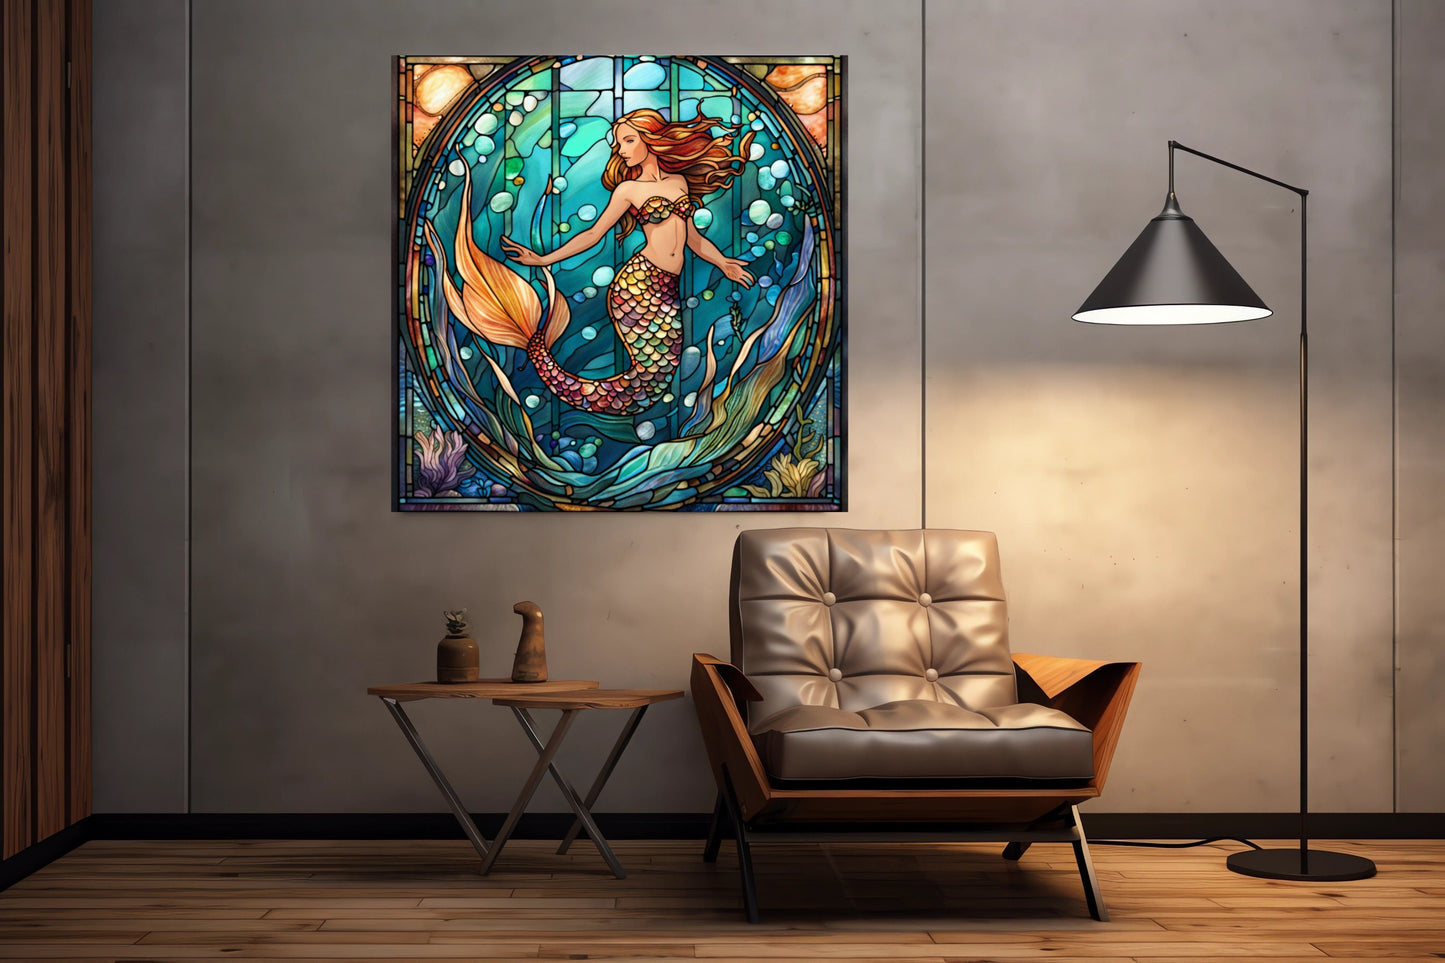 Mermaid, Nautical, Stained Glass Inspired, Metal Sign, Sublimation Sign, Home Decor, Wreath Enhancements, Crafts (Square)